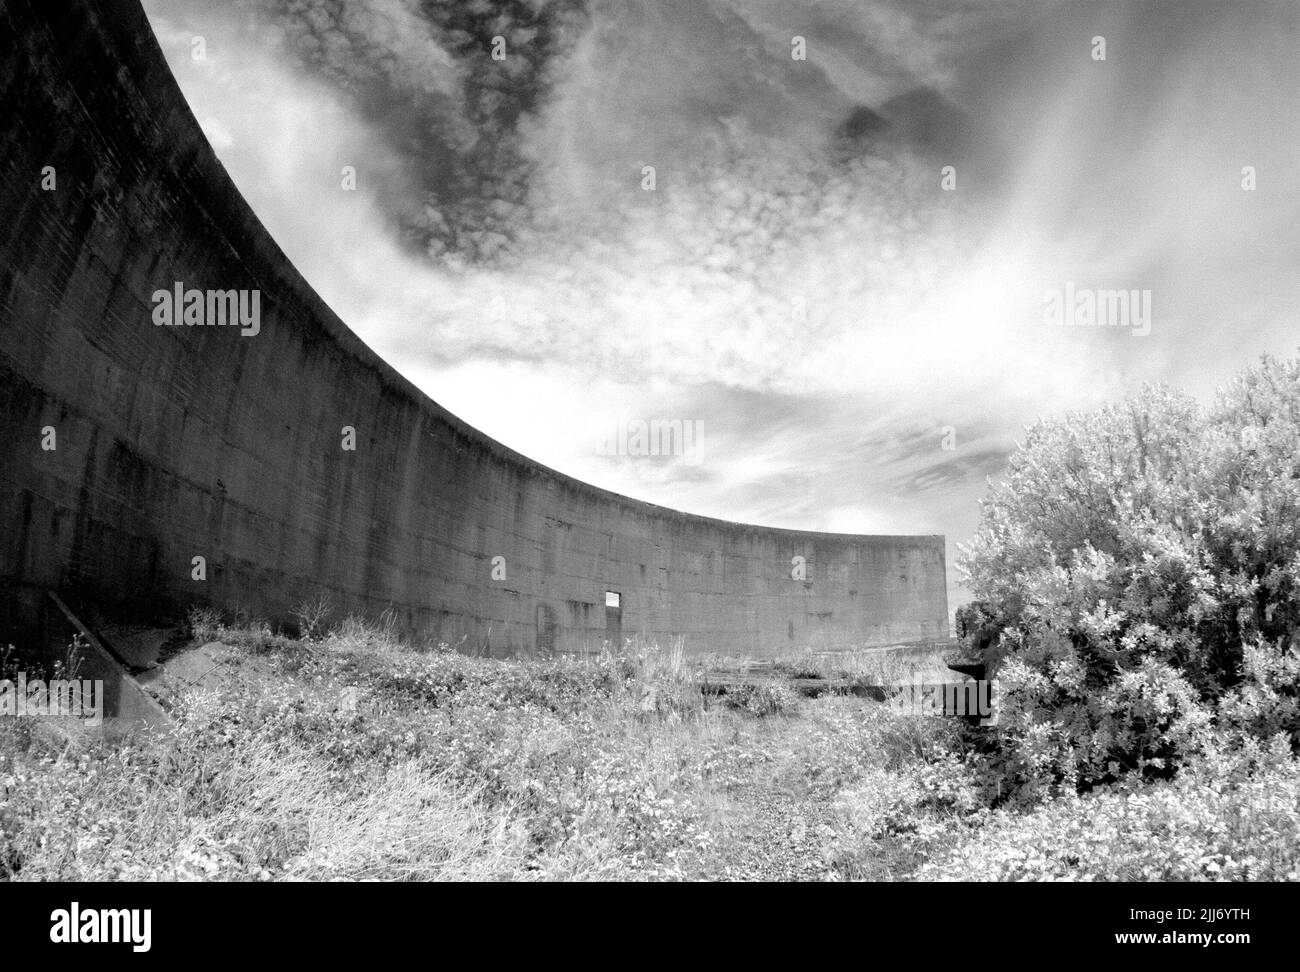 Infrared photo of the 200 foot sound mirror at Lade Pits, part of RSPB Dungeness Nature Reserve, Kent, England. Stock Photo